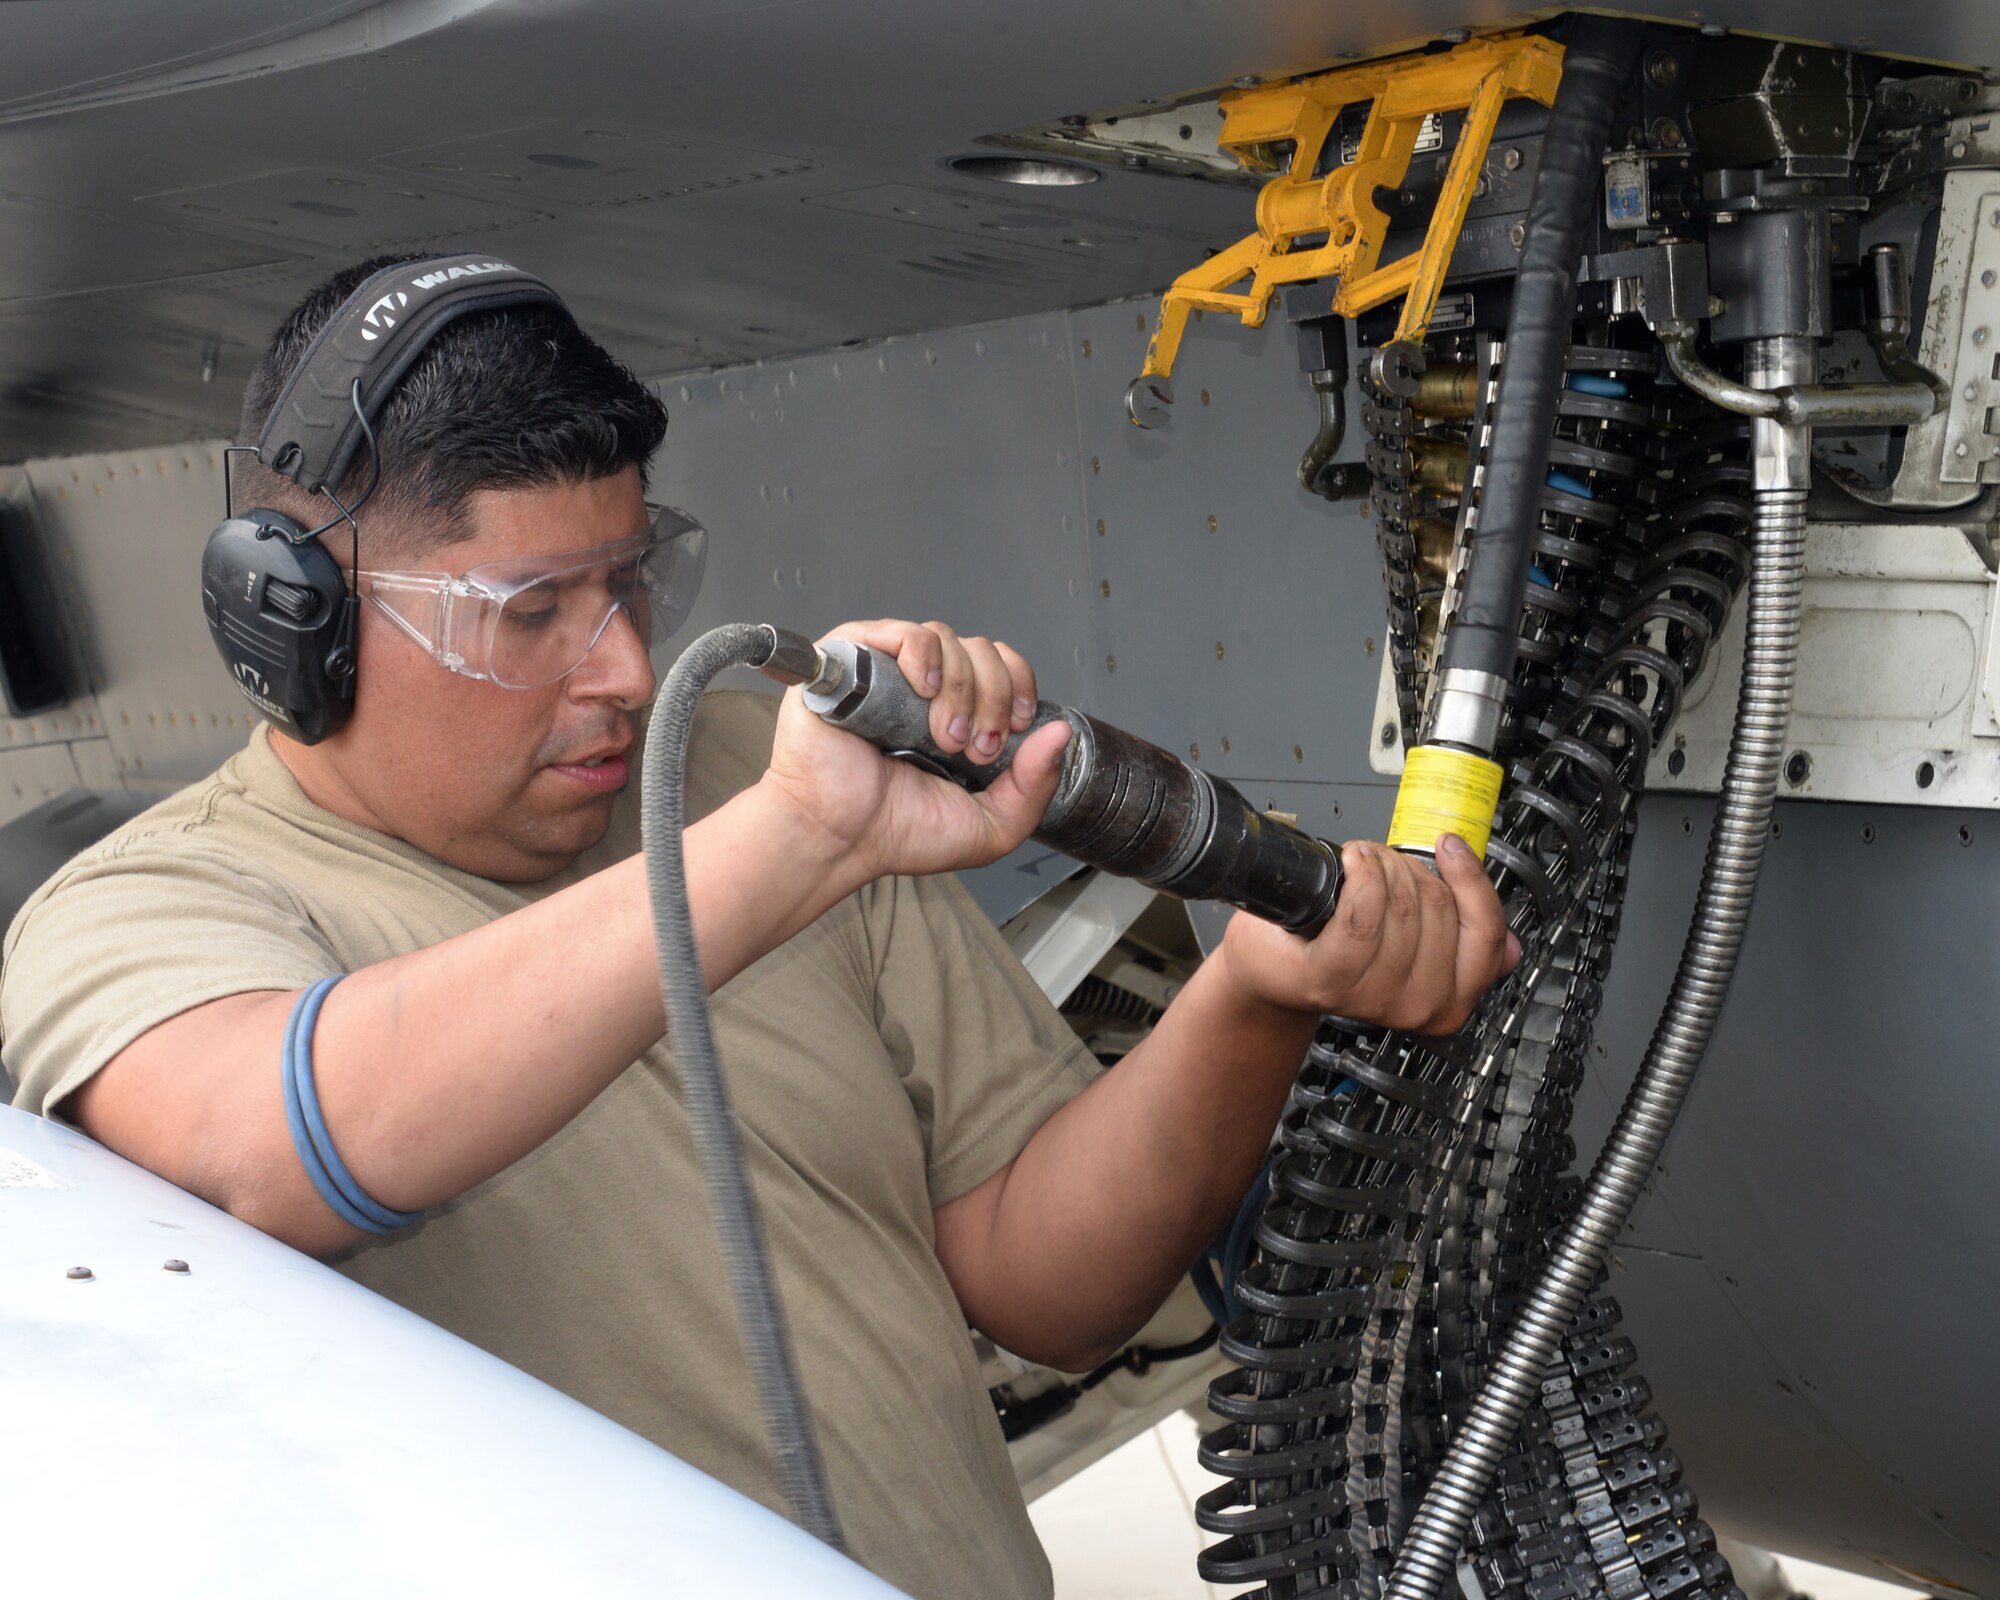 A picture of U.S. Air Force Staff Sgt. Daniel Umana, weapons loader with the New Jersey Air National Guard's 177th Fighter Wing, working on a 177Fw F-16C Fighting Falcon.